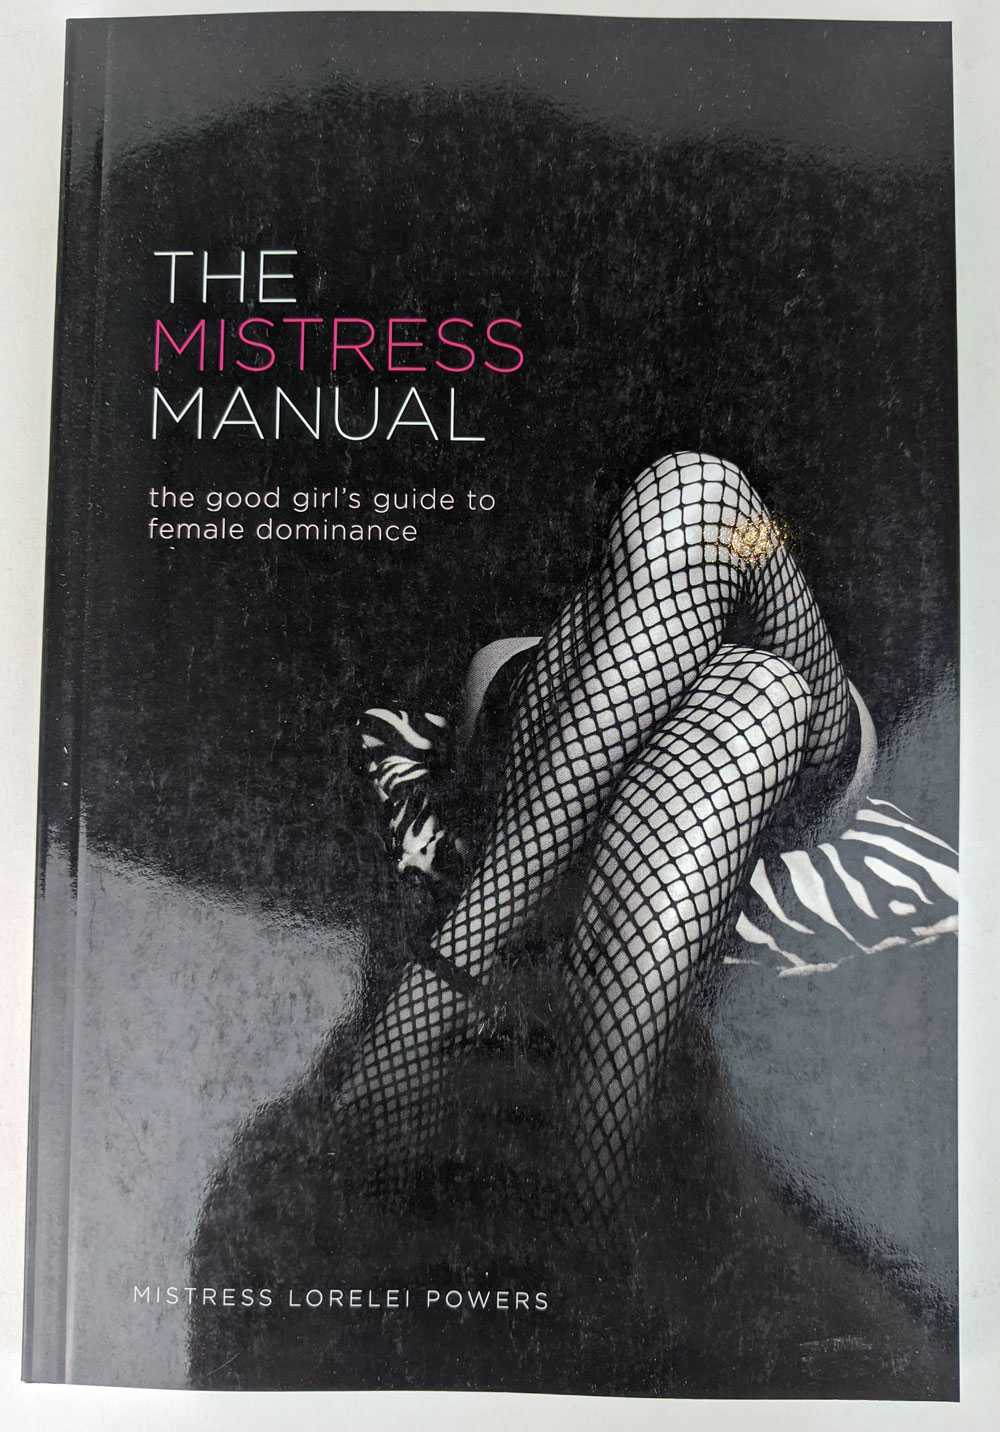 Mistress Lorelei Powers - The Mistress Manual: The Good Girl's Guide to Female Dominance